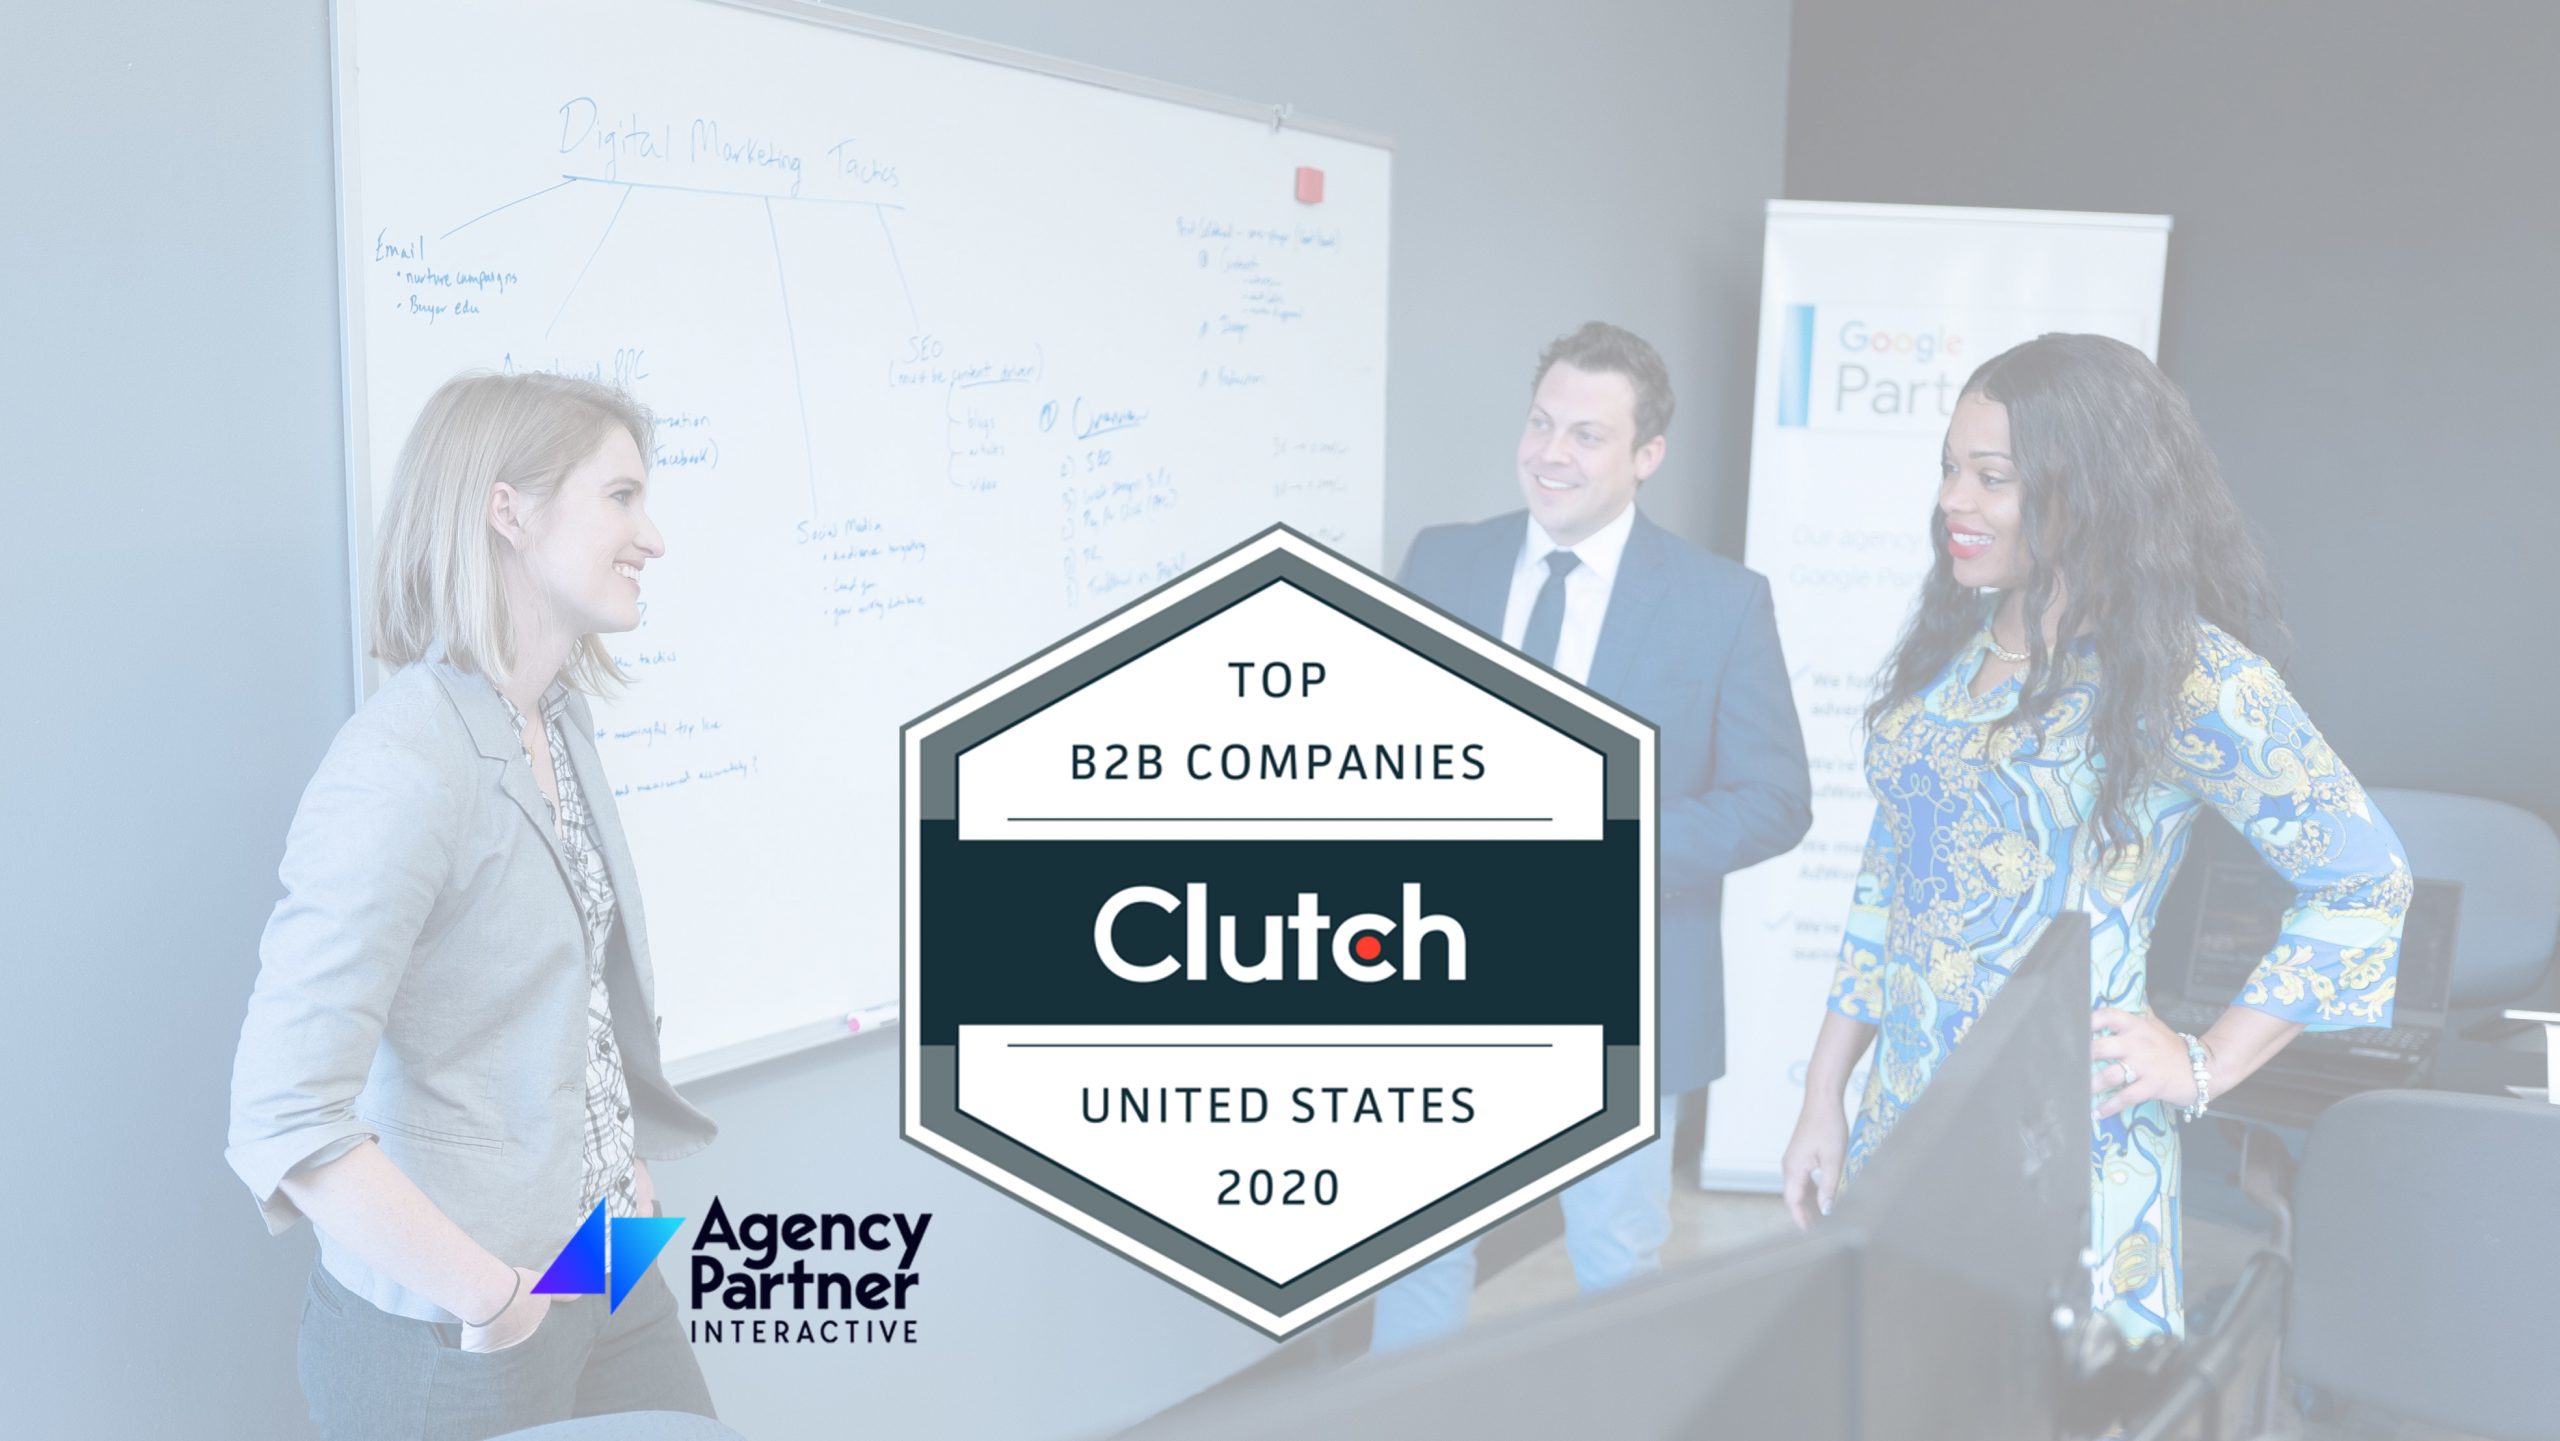 AGENCY PARTNER INTERACTIVE Ranks As Top B2B Web Design & Digital Marketing Firm in US by Clutch